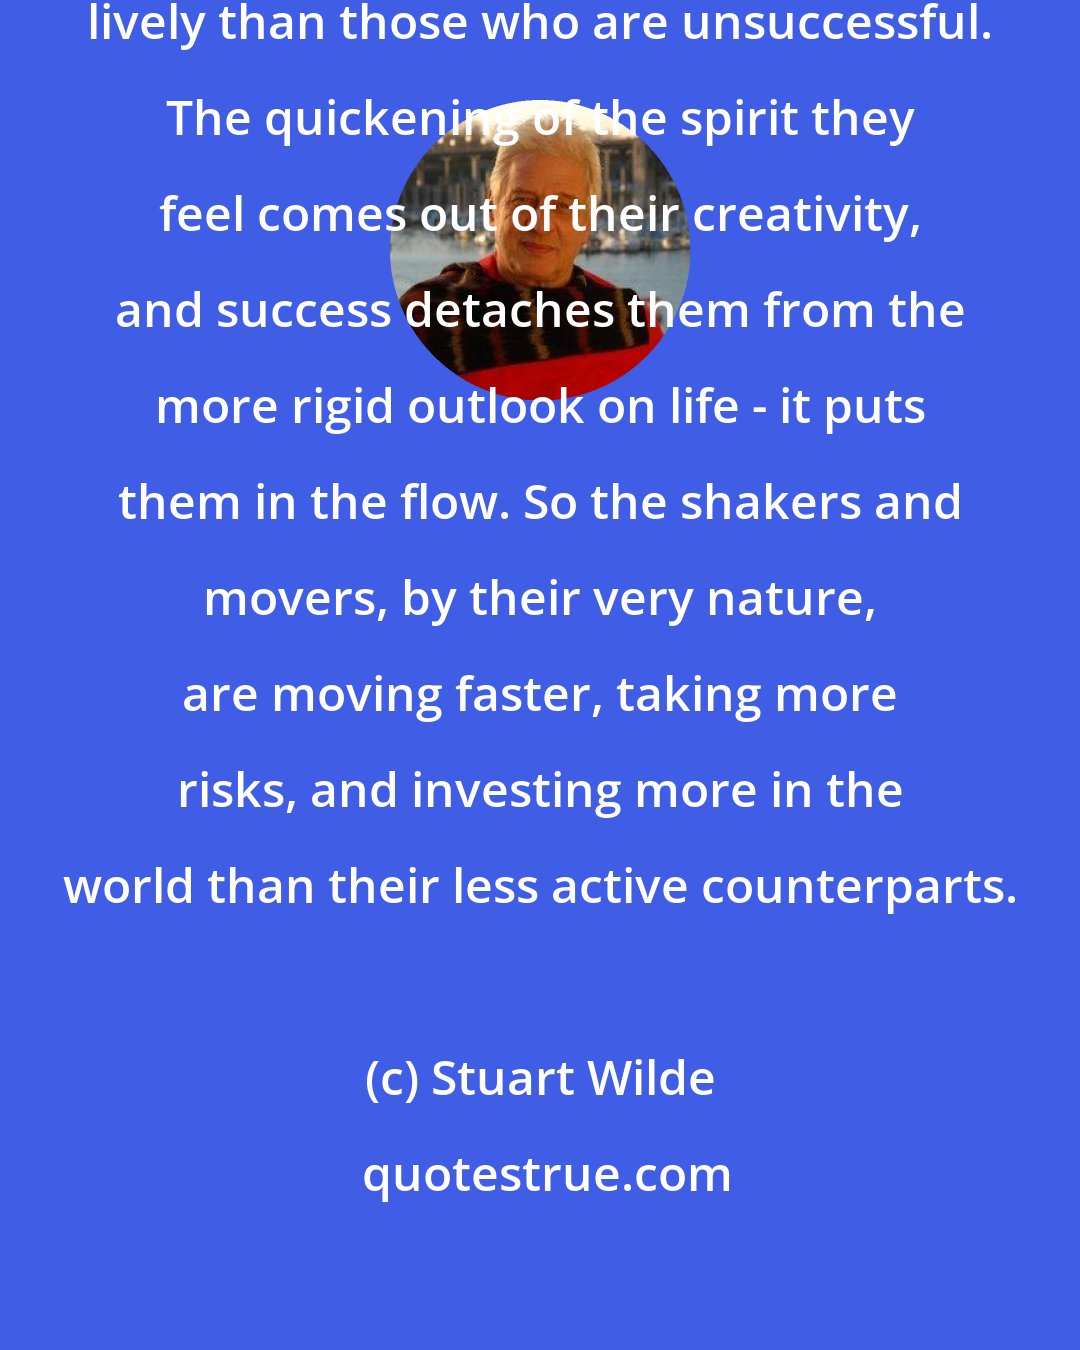 Stuart Wilde: Successful people are usually more lively than those who are unsuccessful. The quickening of the spirit they feel comes out of their creativity, and success detaches them from the more rigid outlook on life - it puts them in the flow. So the shakers and movers, by their very nature, are moving faster, taking more risks, and investing more in the world than their less active counterparts.